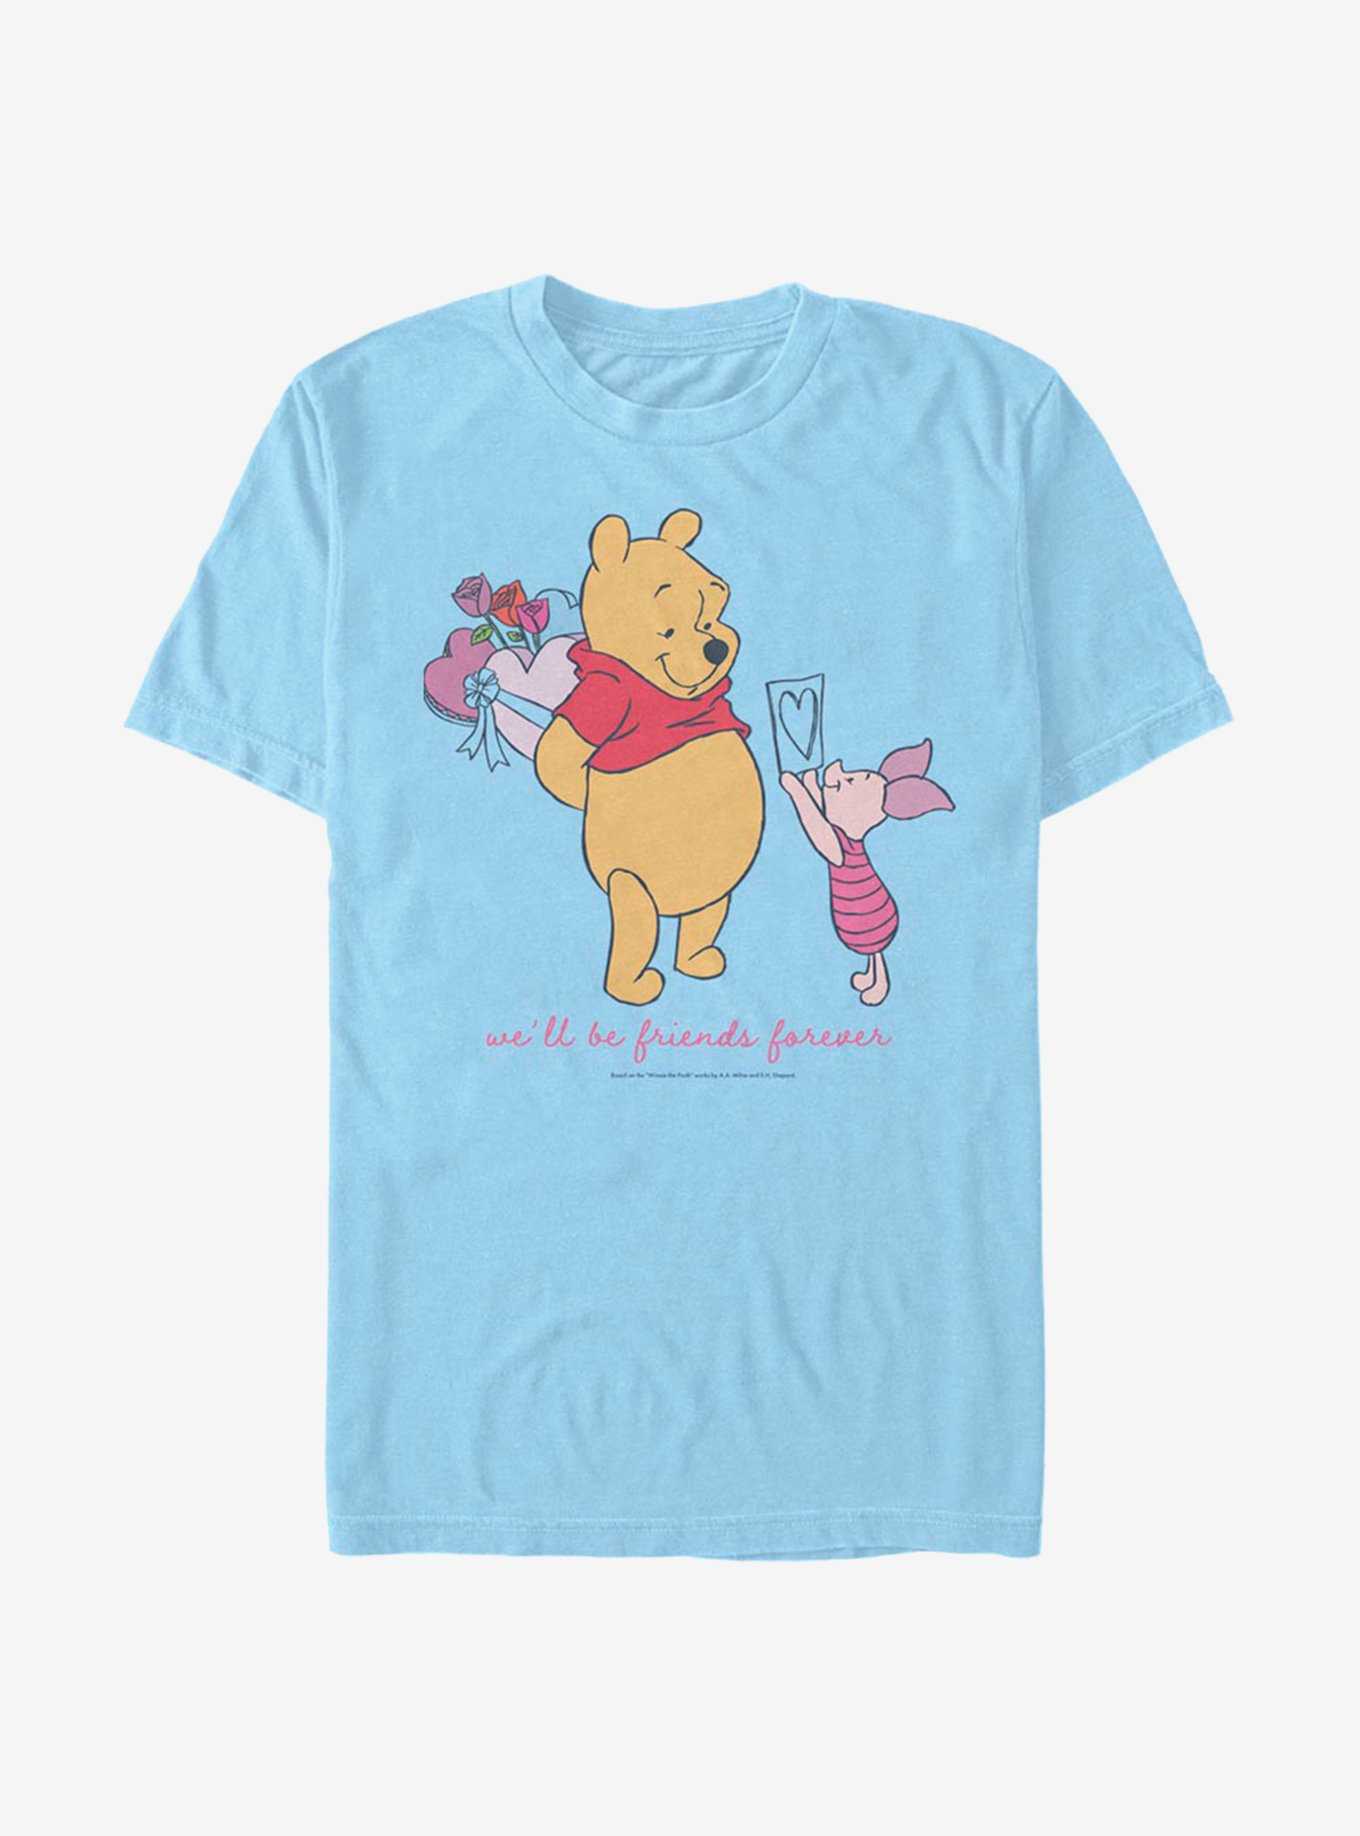 Disney Winnie The Pooh Friends Forever T-Shirt, , hi-res